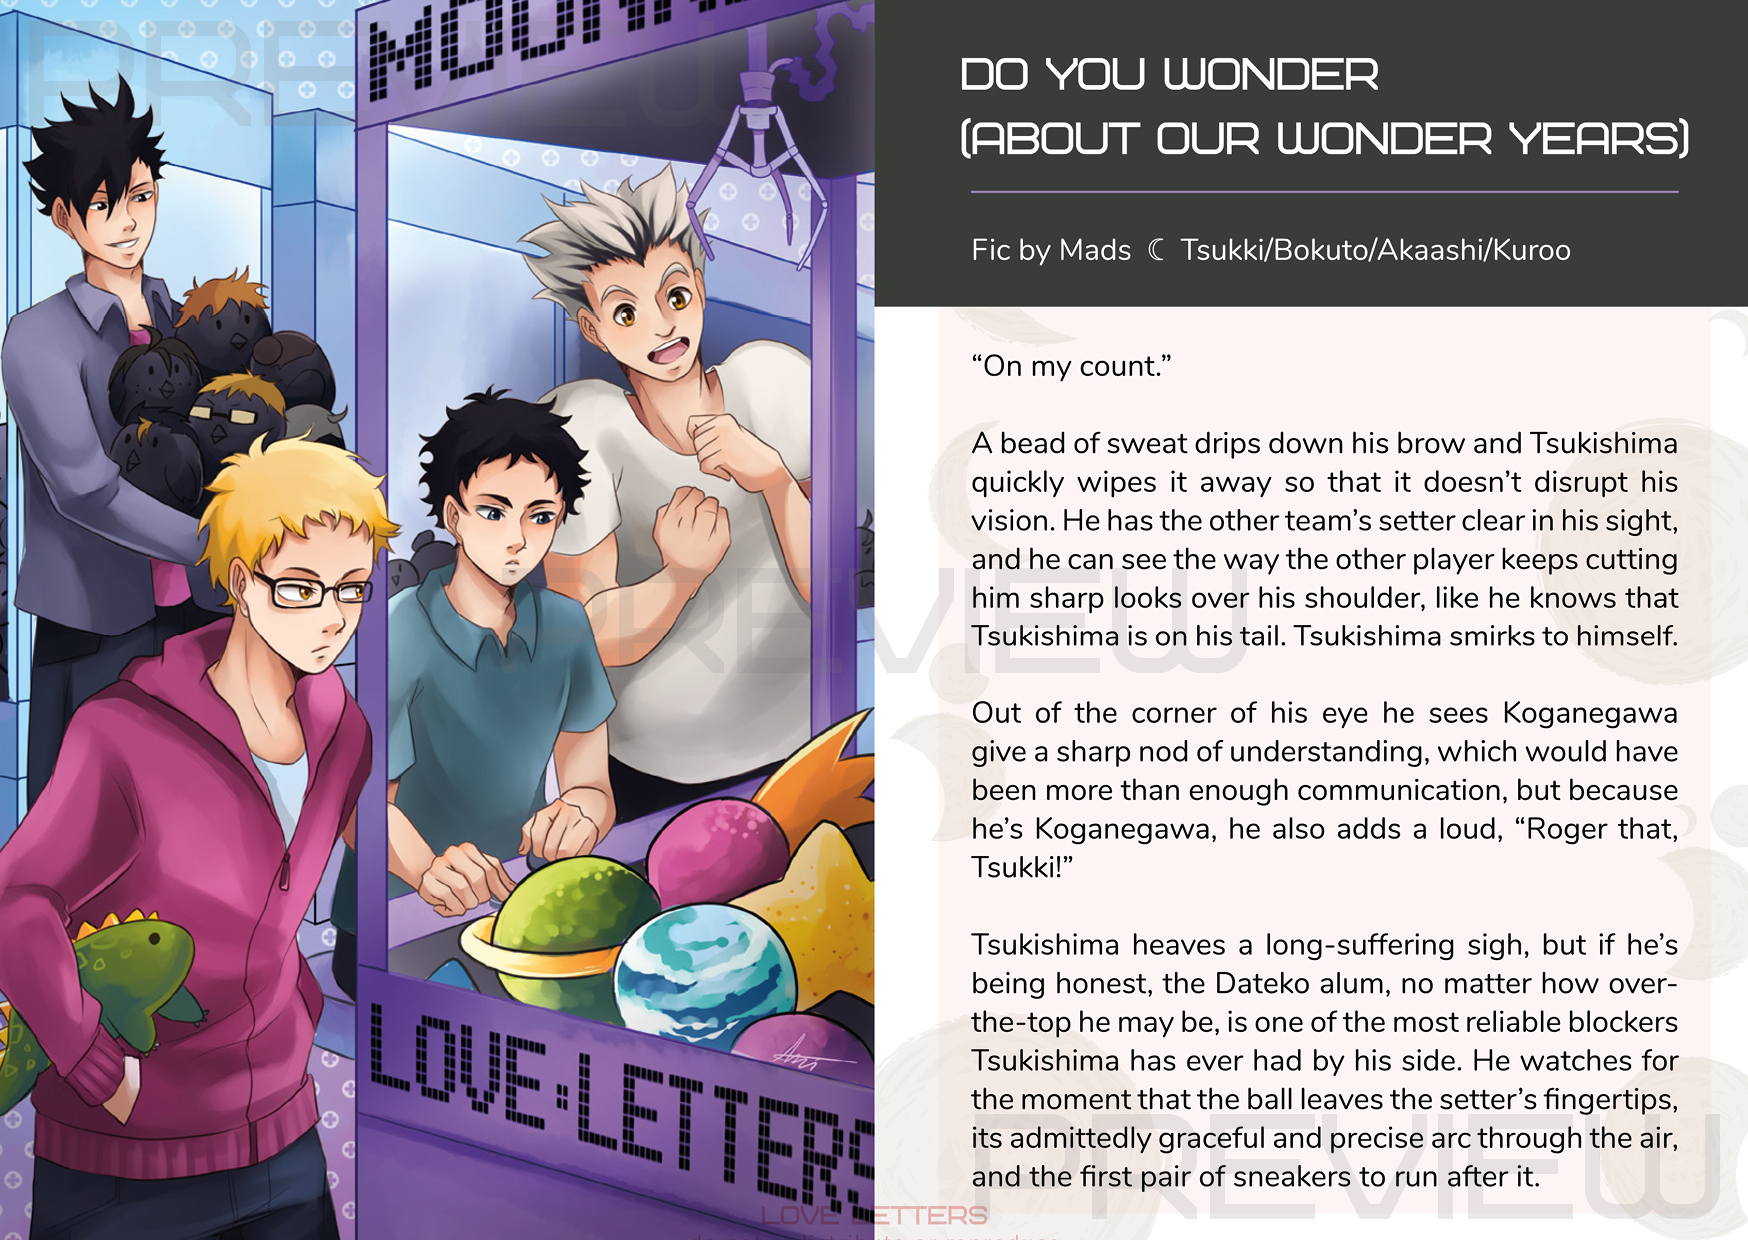 A screenshot of one of the digital zine's spreads--an illustration by Ani on the left, and the first page of Mads' fanfic on the right.